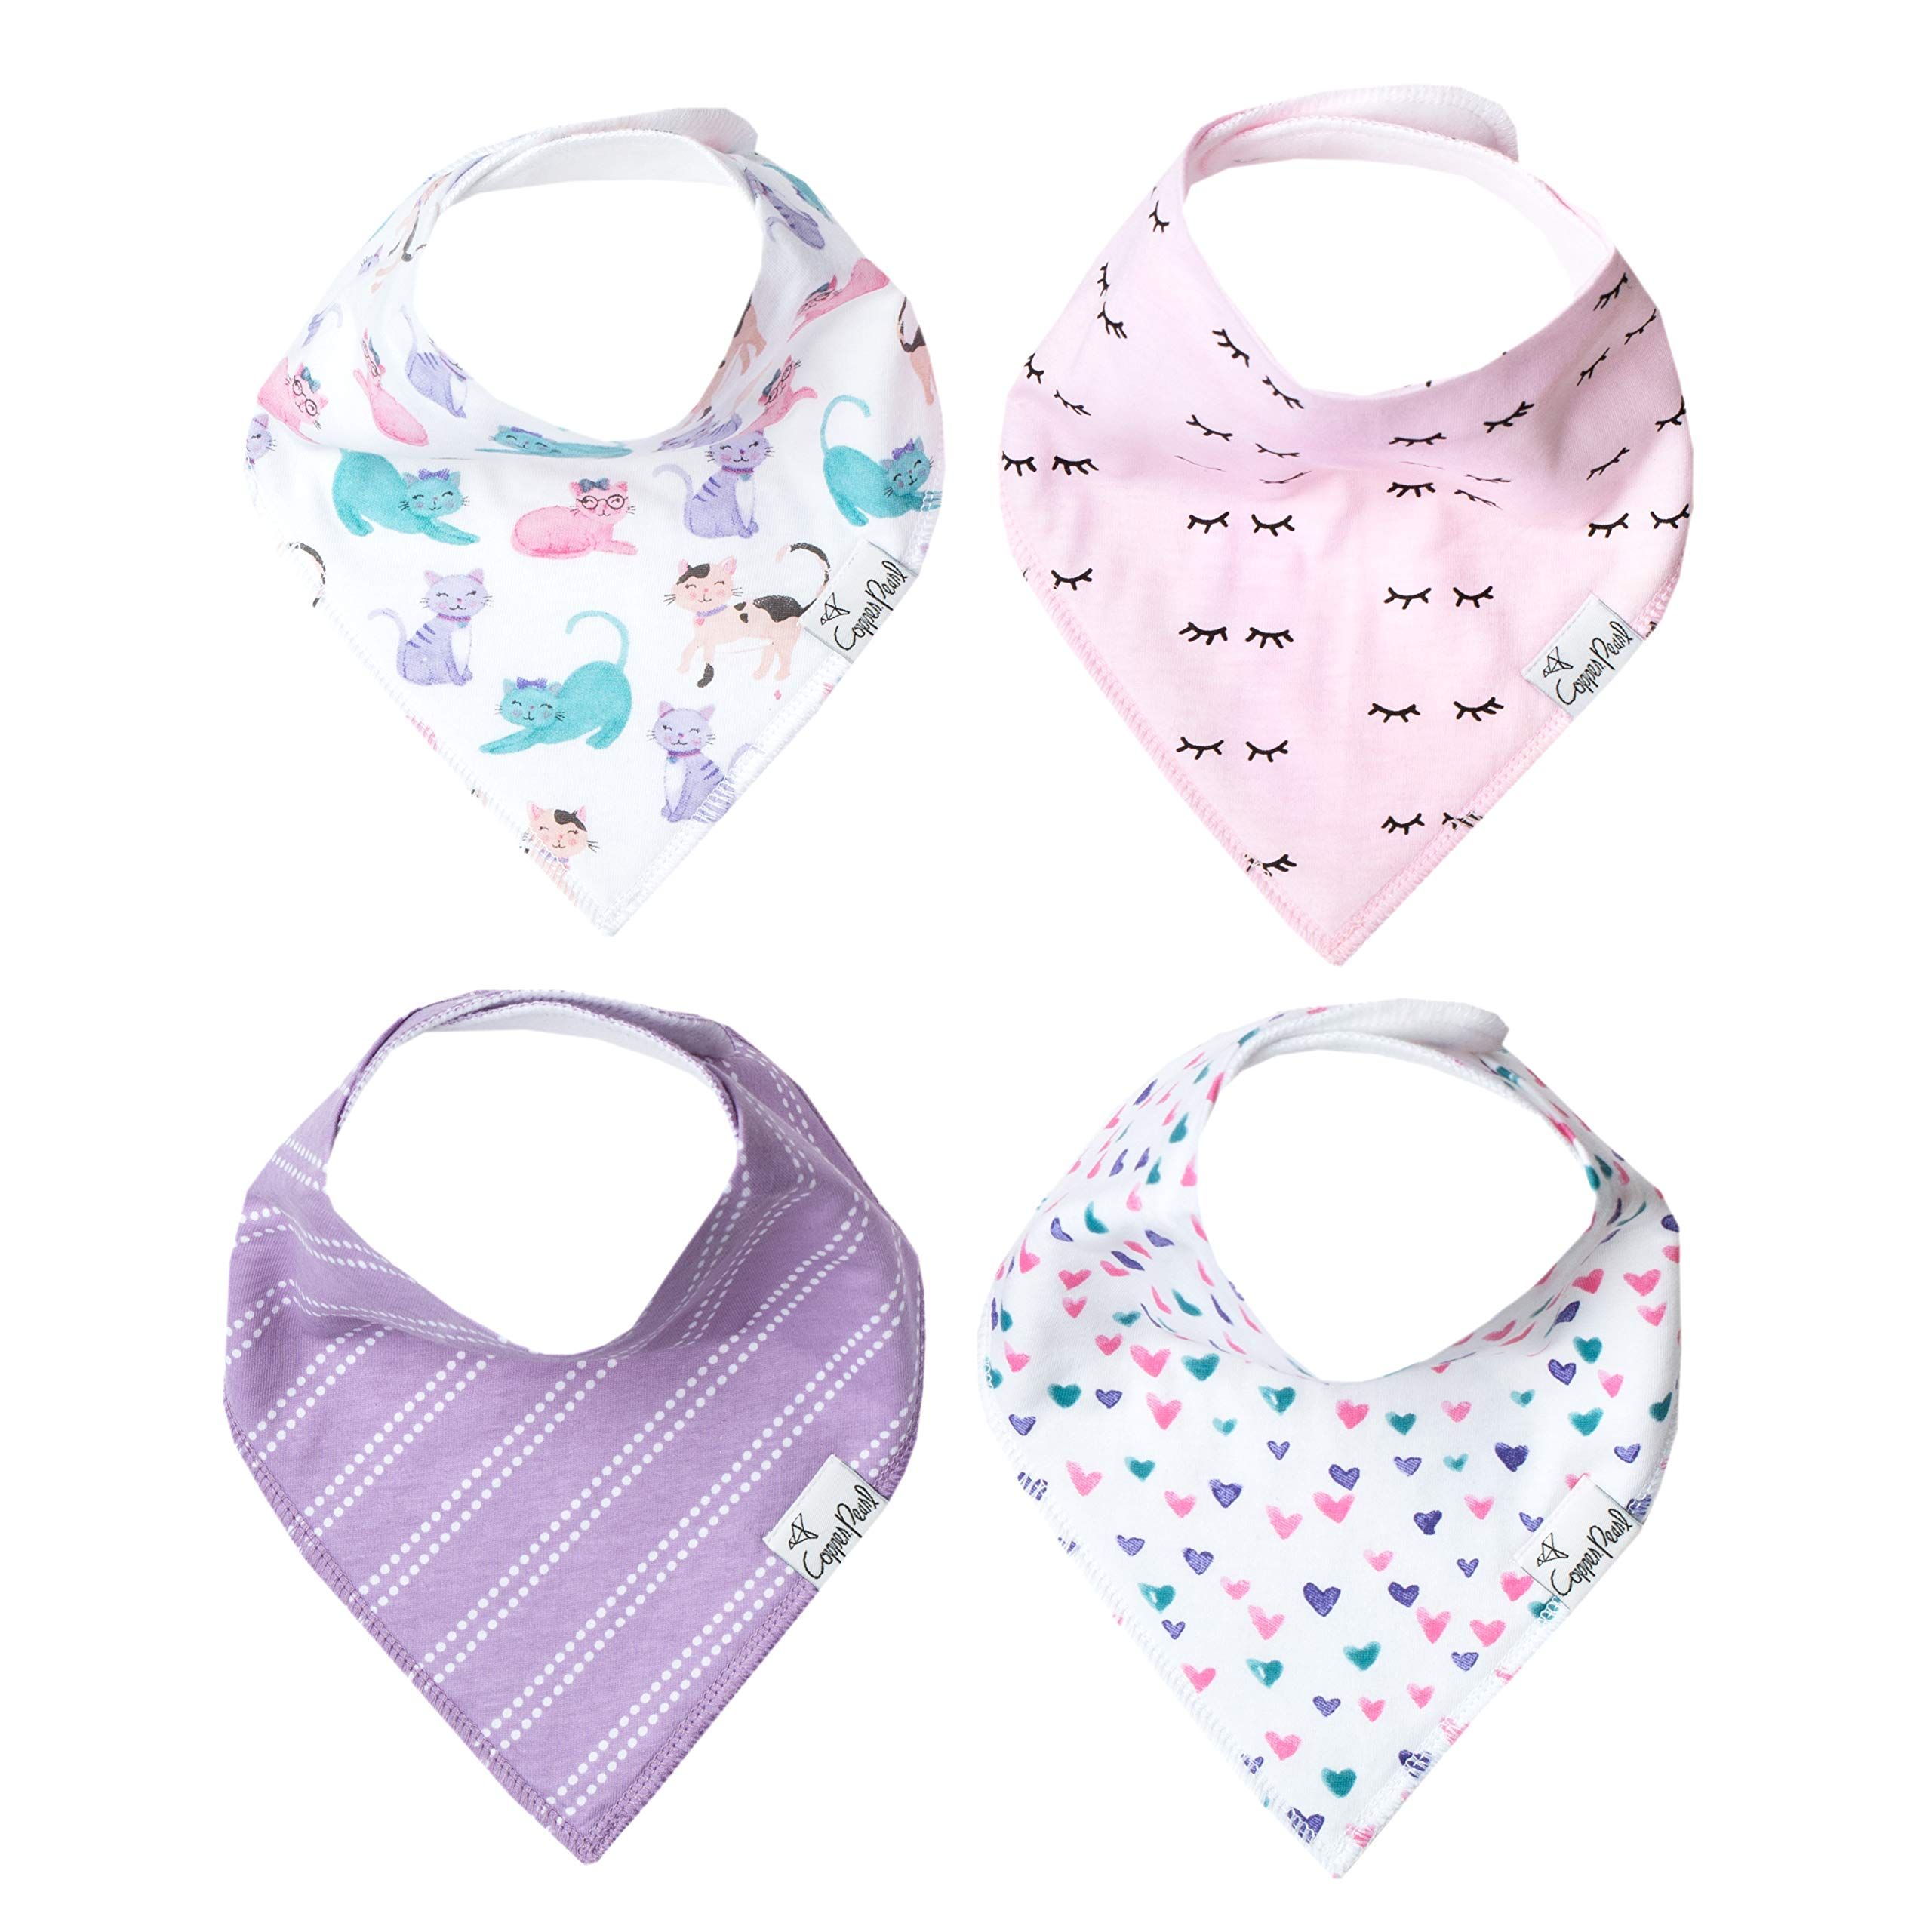 Baby Bandana Drool Bibs for Drooling and Teething 4 Pack Gift Set “Sassy” by Copper Pearl | Amazon (US)